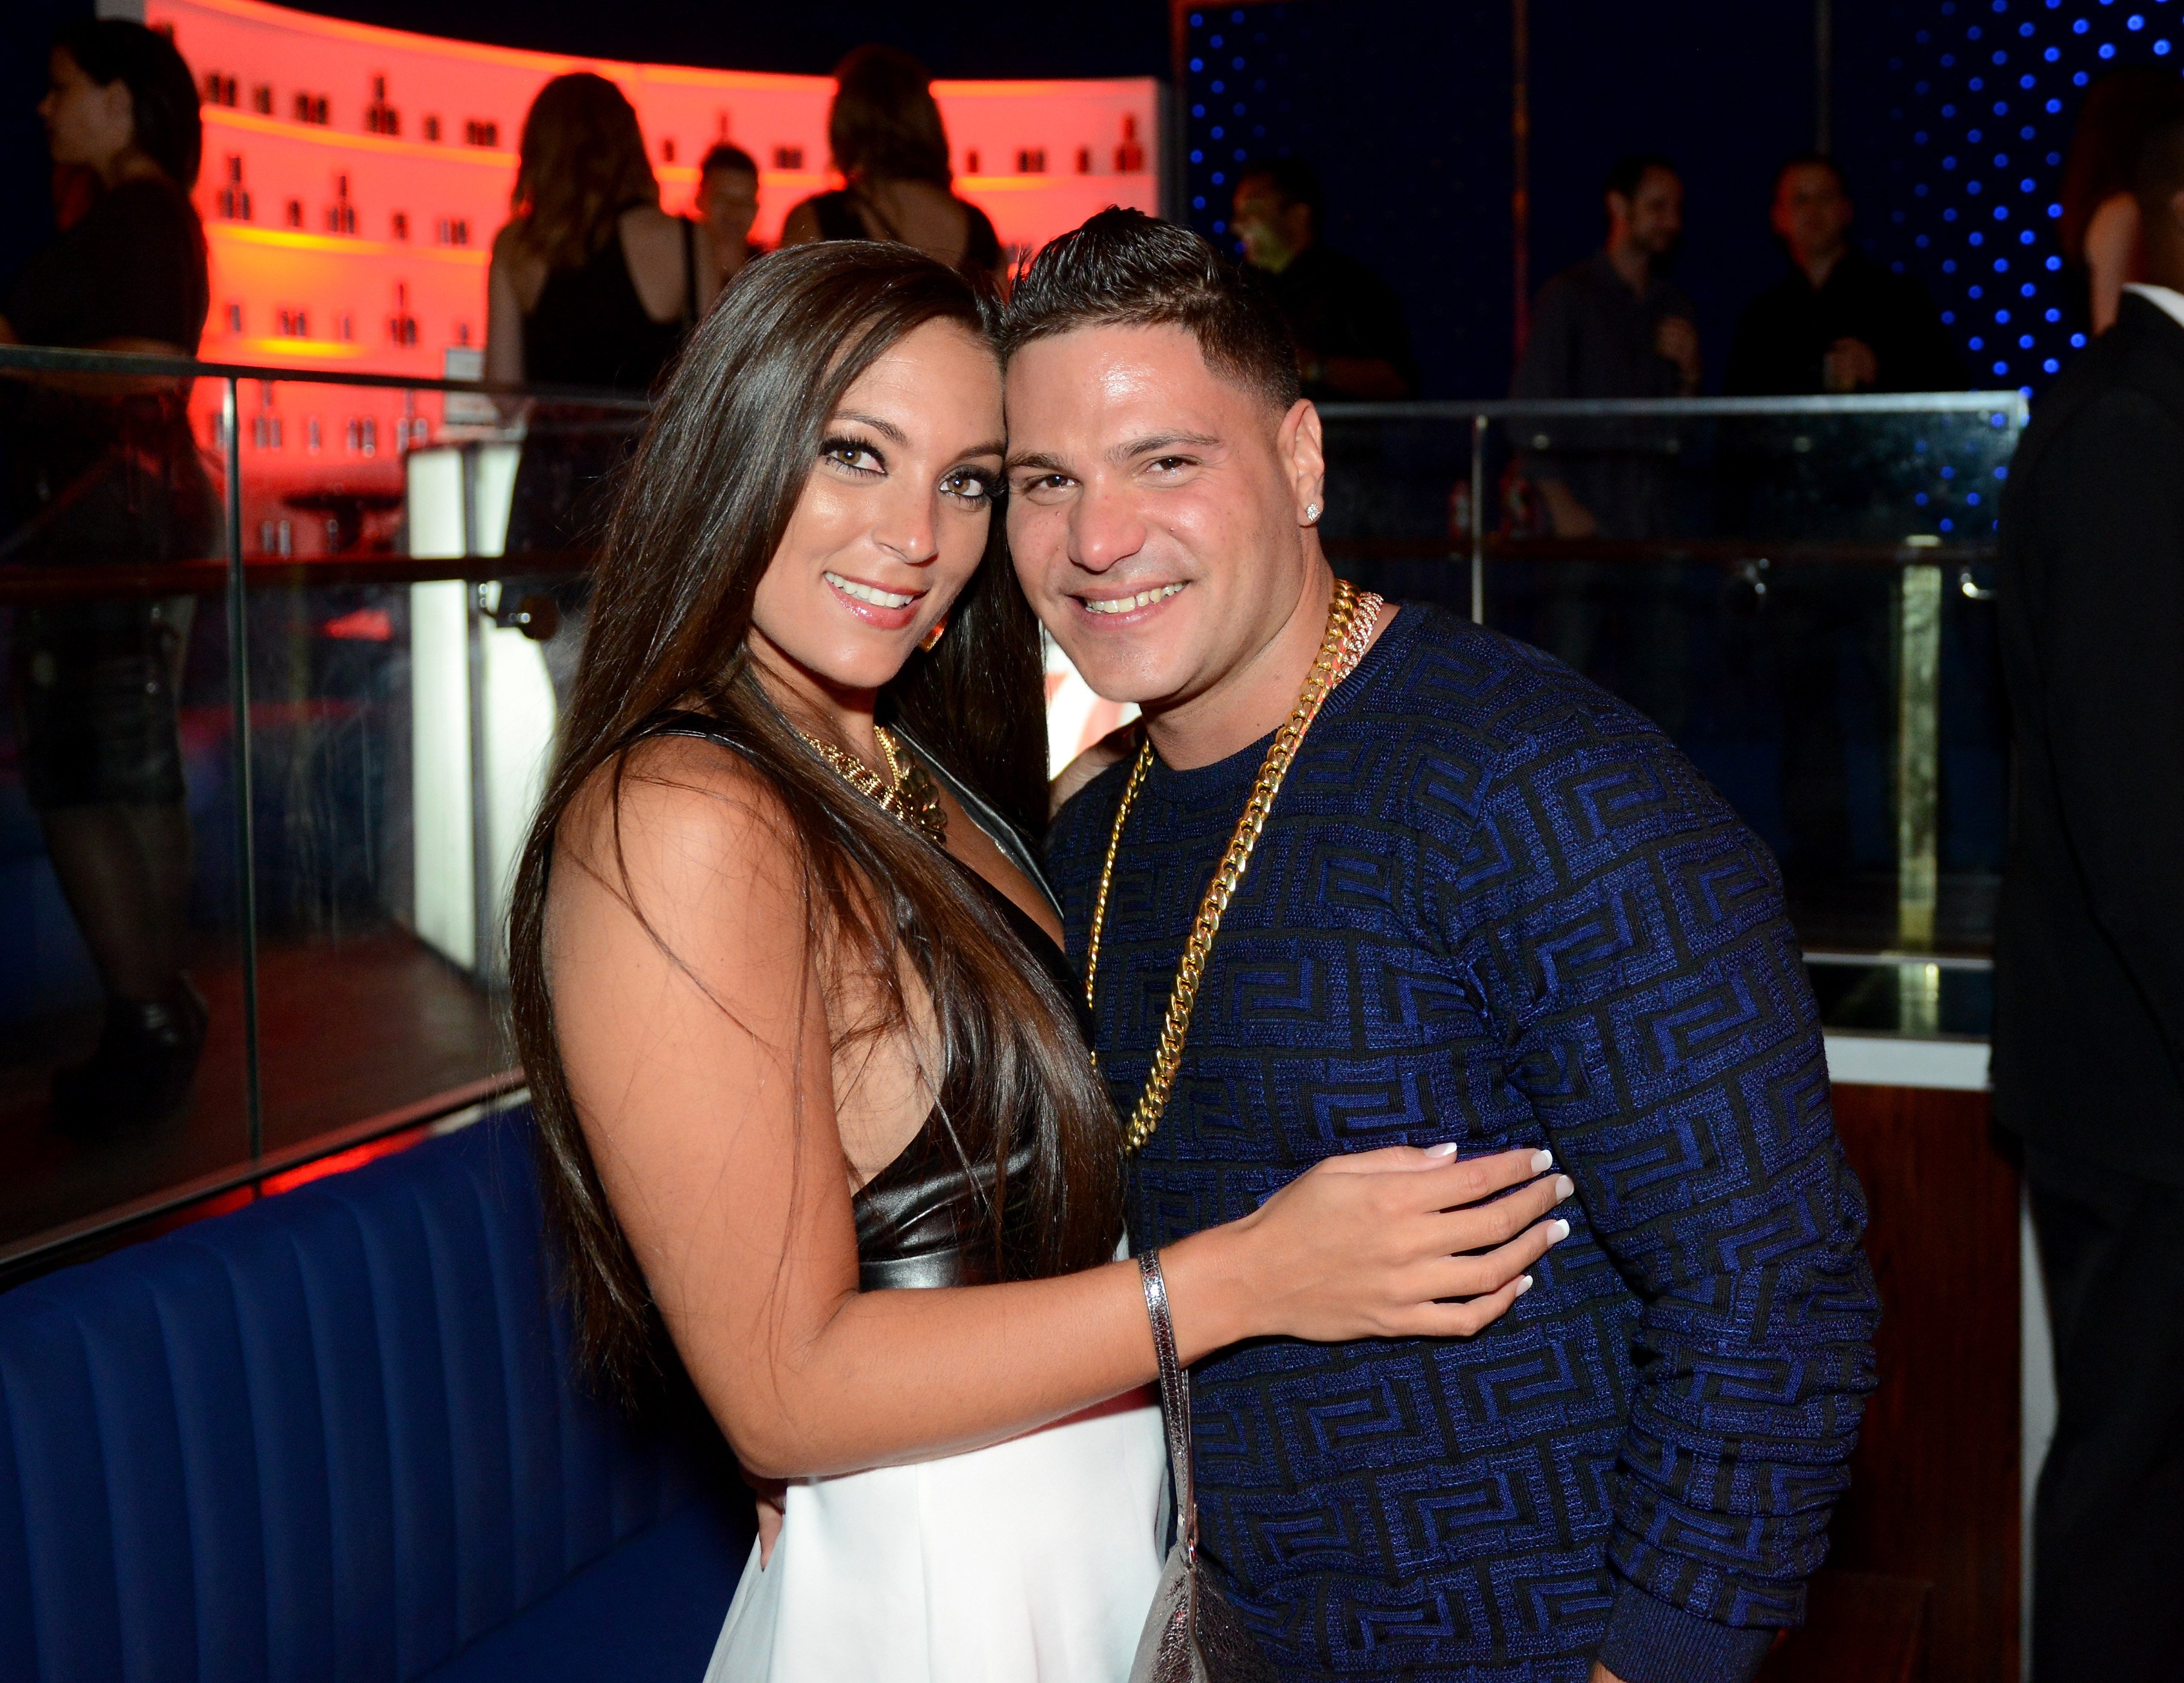 ‘Jersey Shore: Family Vacation’ Theory: Ronnie Ortiz-Magro Will Return Before Sammi ‘Sweetheart’ Giancola Does